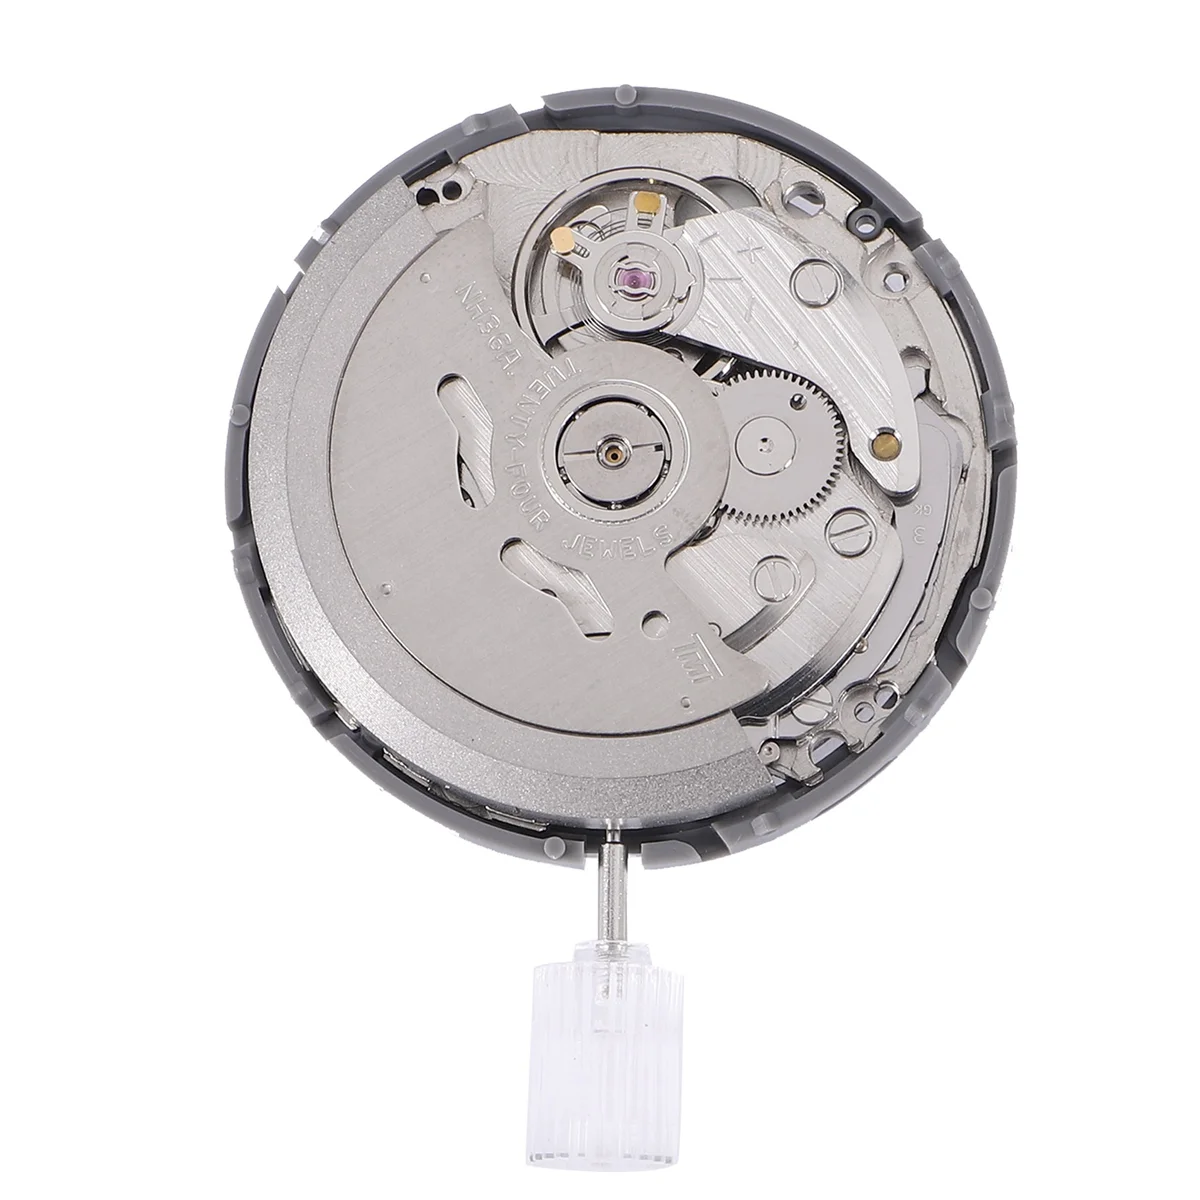 

NH36/NH36A Automatic Movement Crown At 3 Self-Winding Mechanical Date/Day Watch Replacements Part for SEIKO